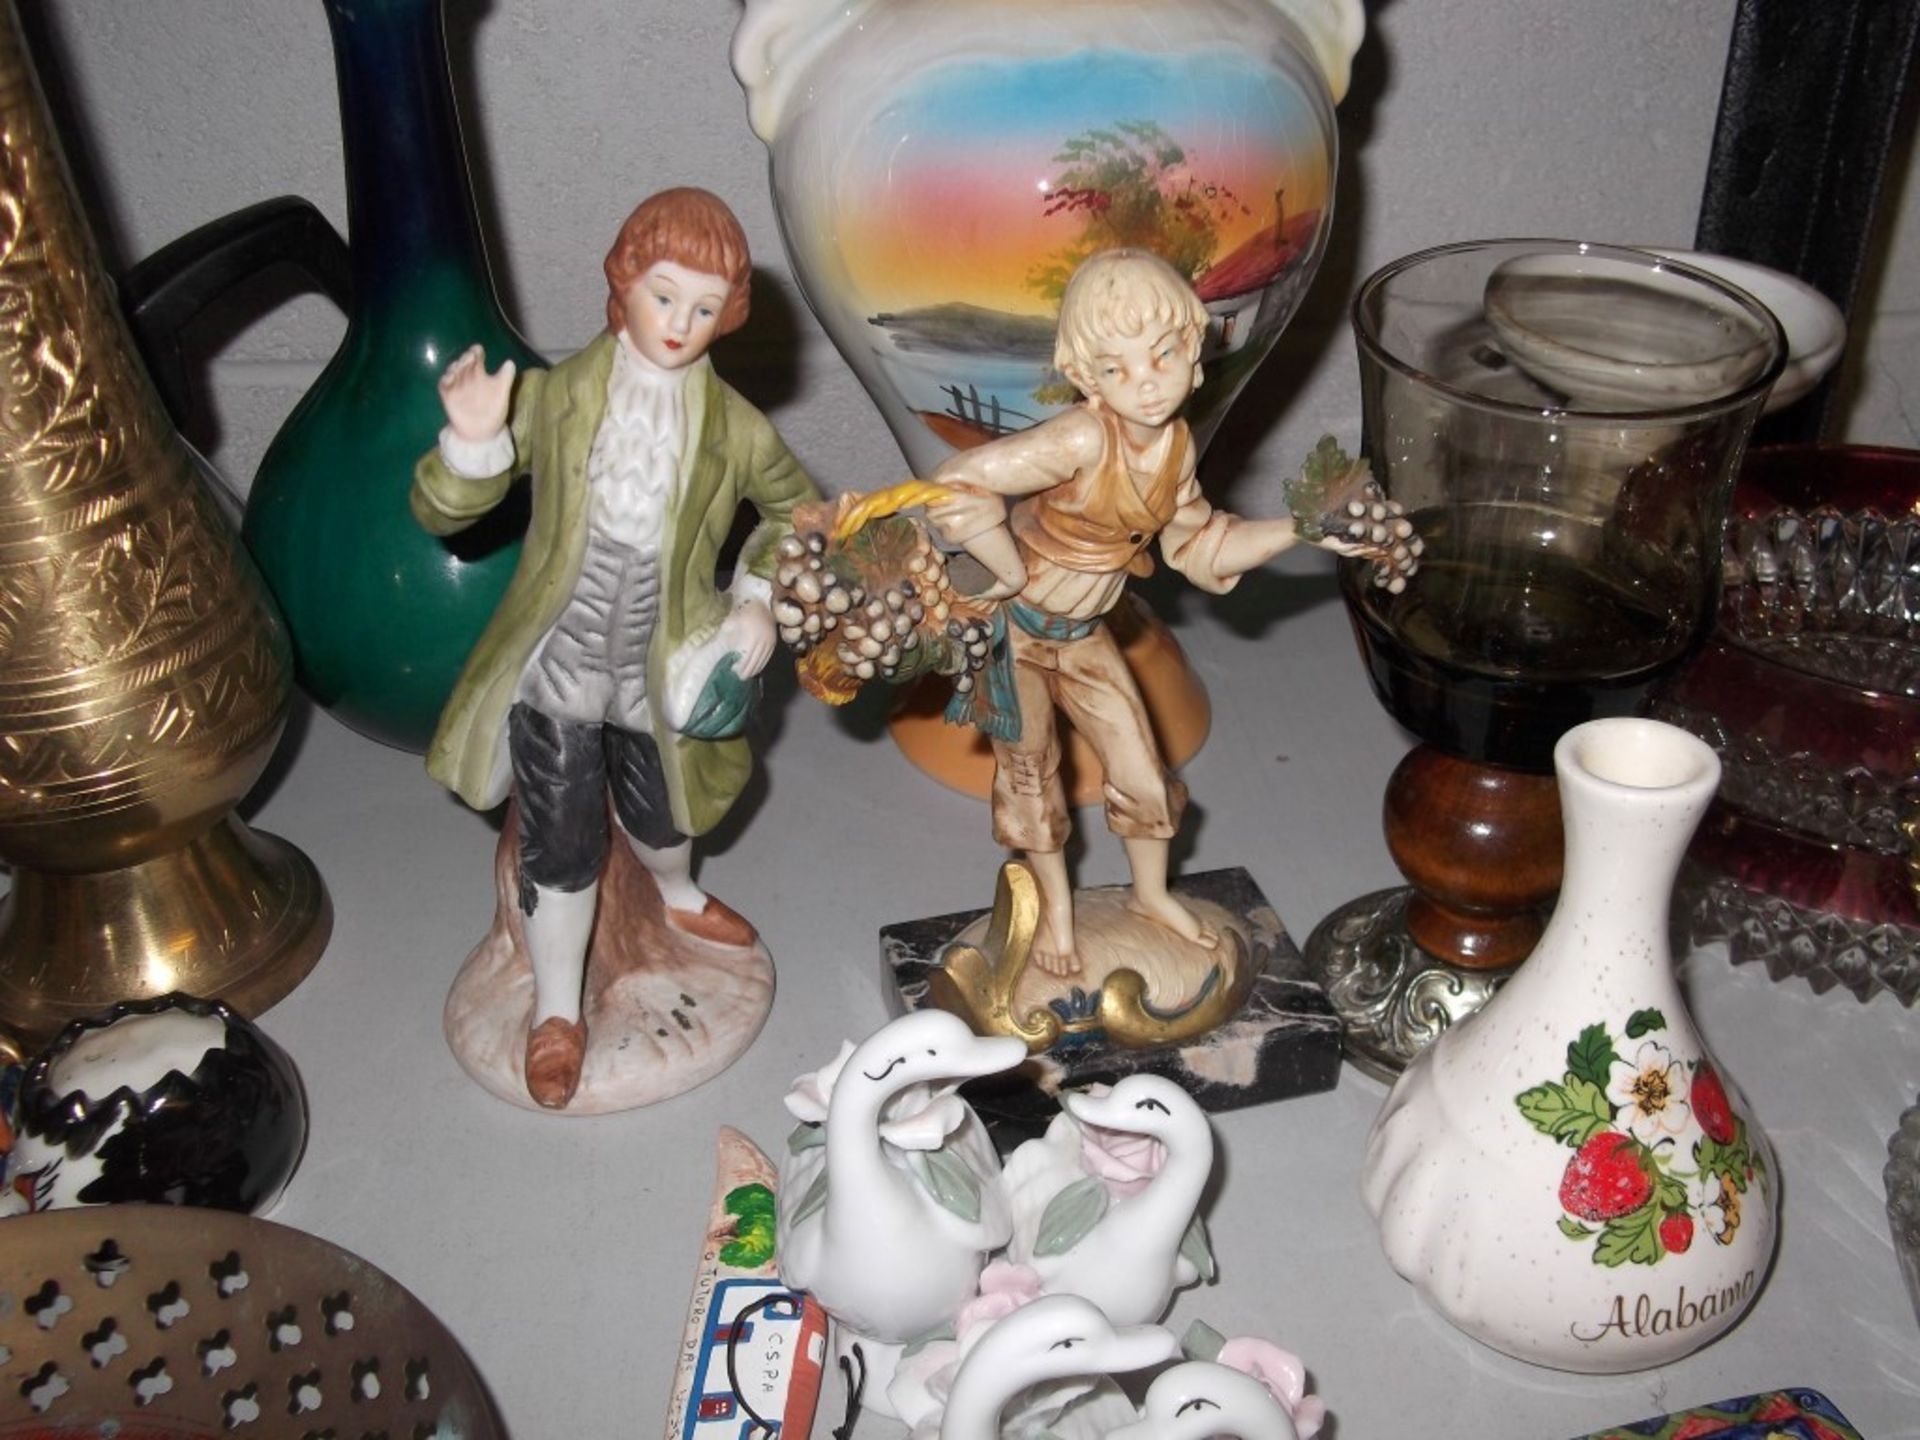 37 x Assorted Decorative Items - Ceramics / Ornaments / Figurines - Pre-Loved, Mostly Of American - Image 4 of 8